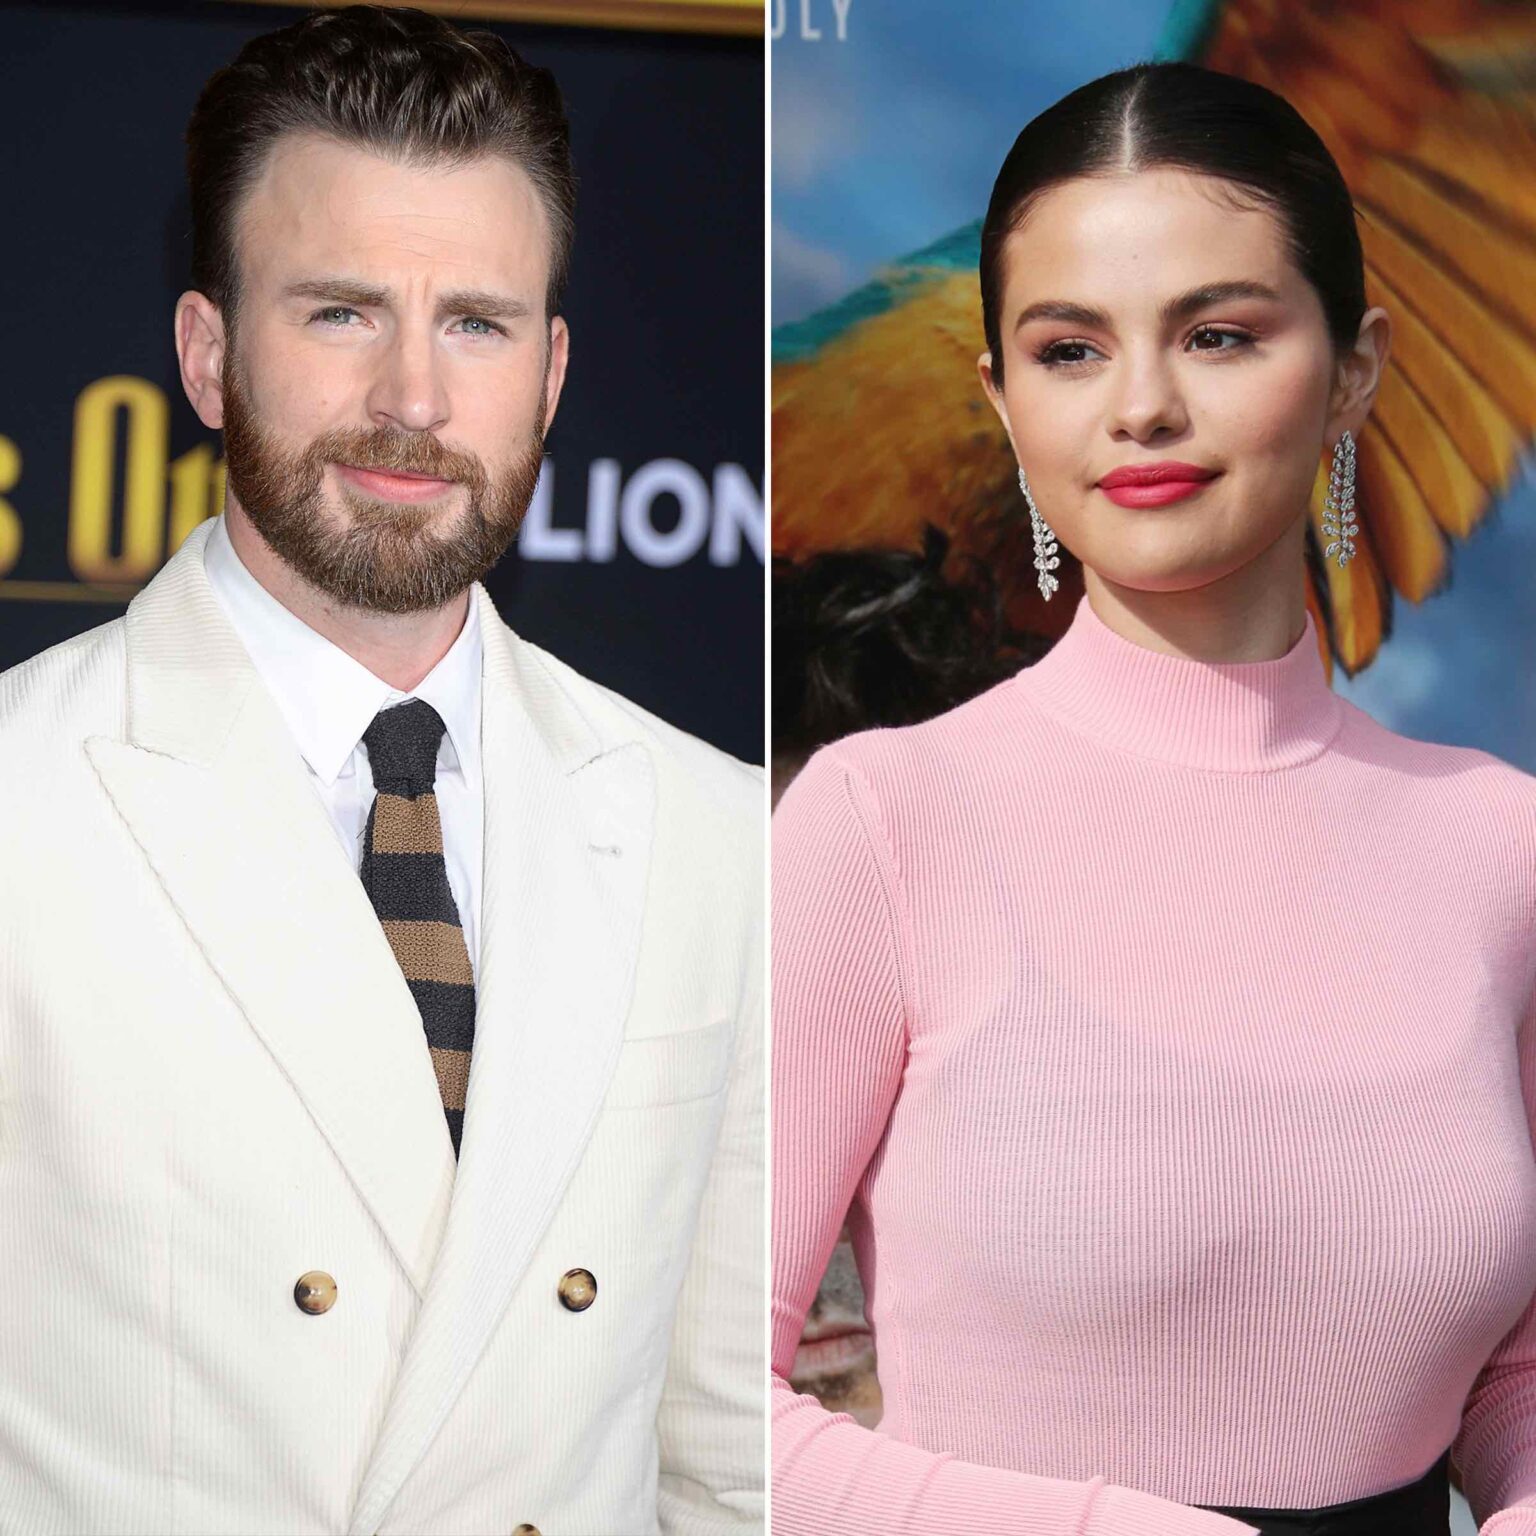 Looks like Chris Evans is still on the market! Get ready for some hot tea as we dive into Chris Evans and these shocking photos!